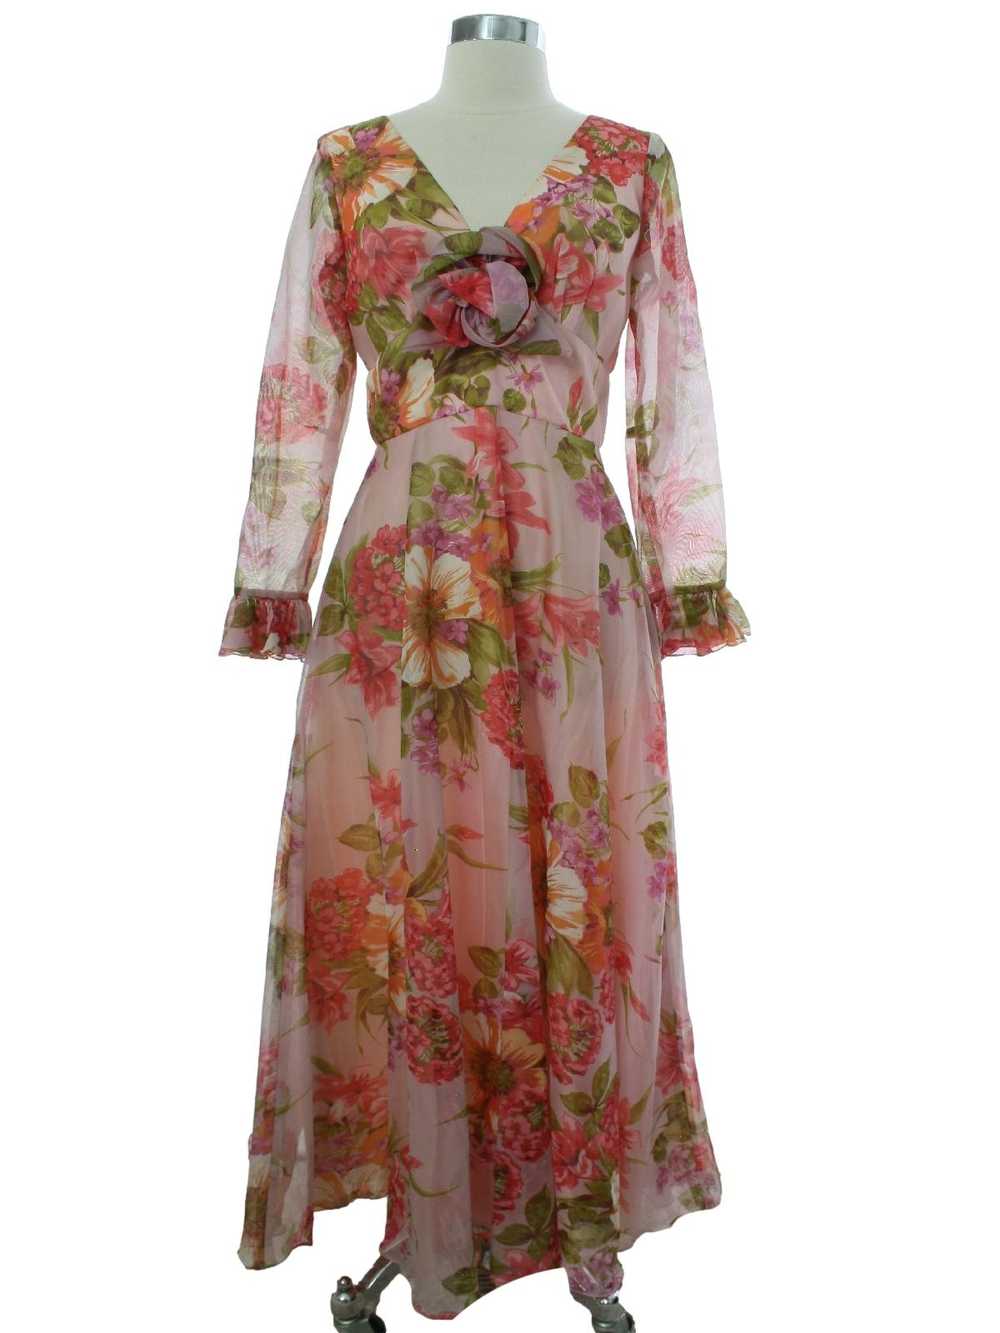 1970's Prom Or Cocktail Maxi Dress - image 1